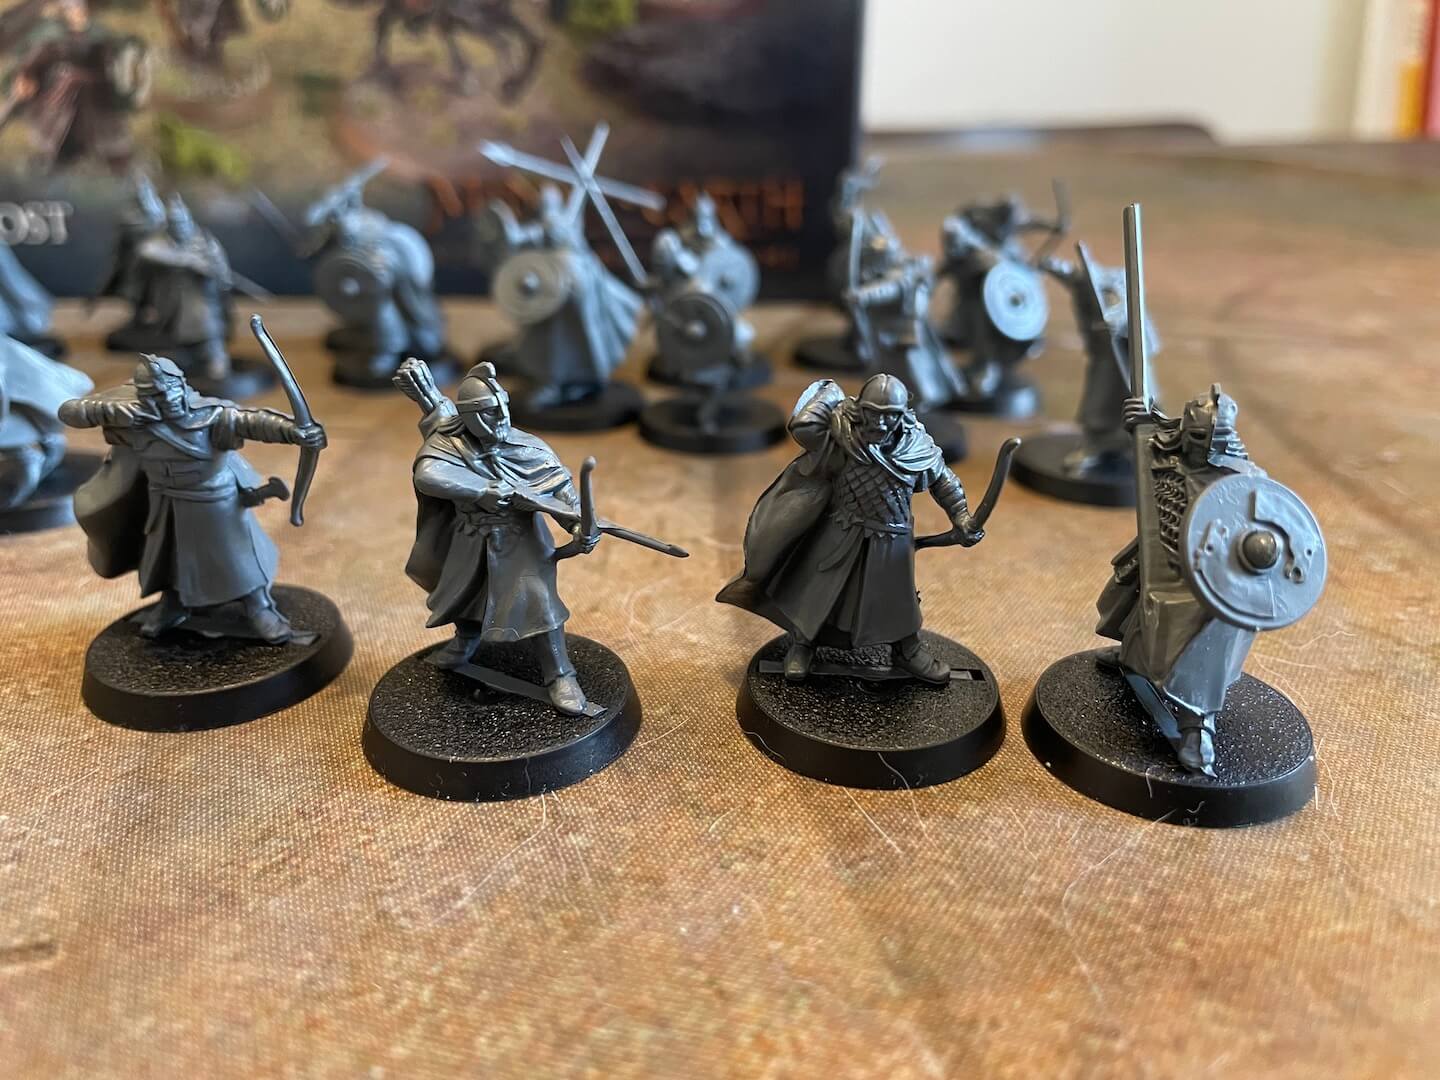 Soldiers stand proud in the Middle-earth Strategy Battle Game Rohan Battlehost